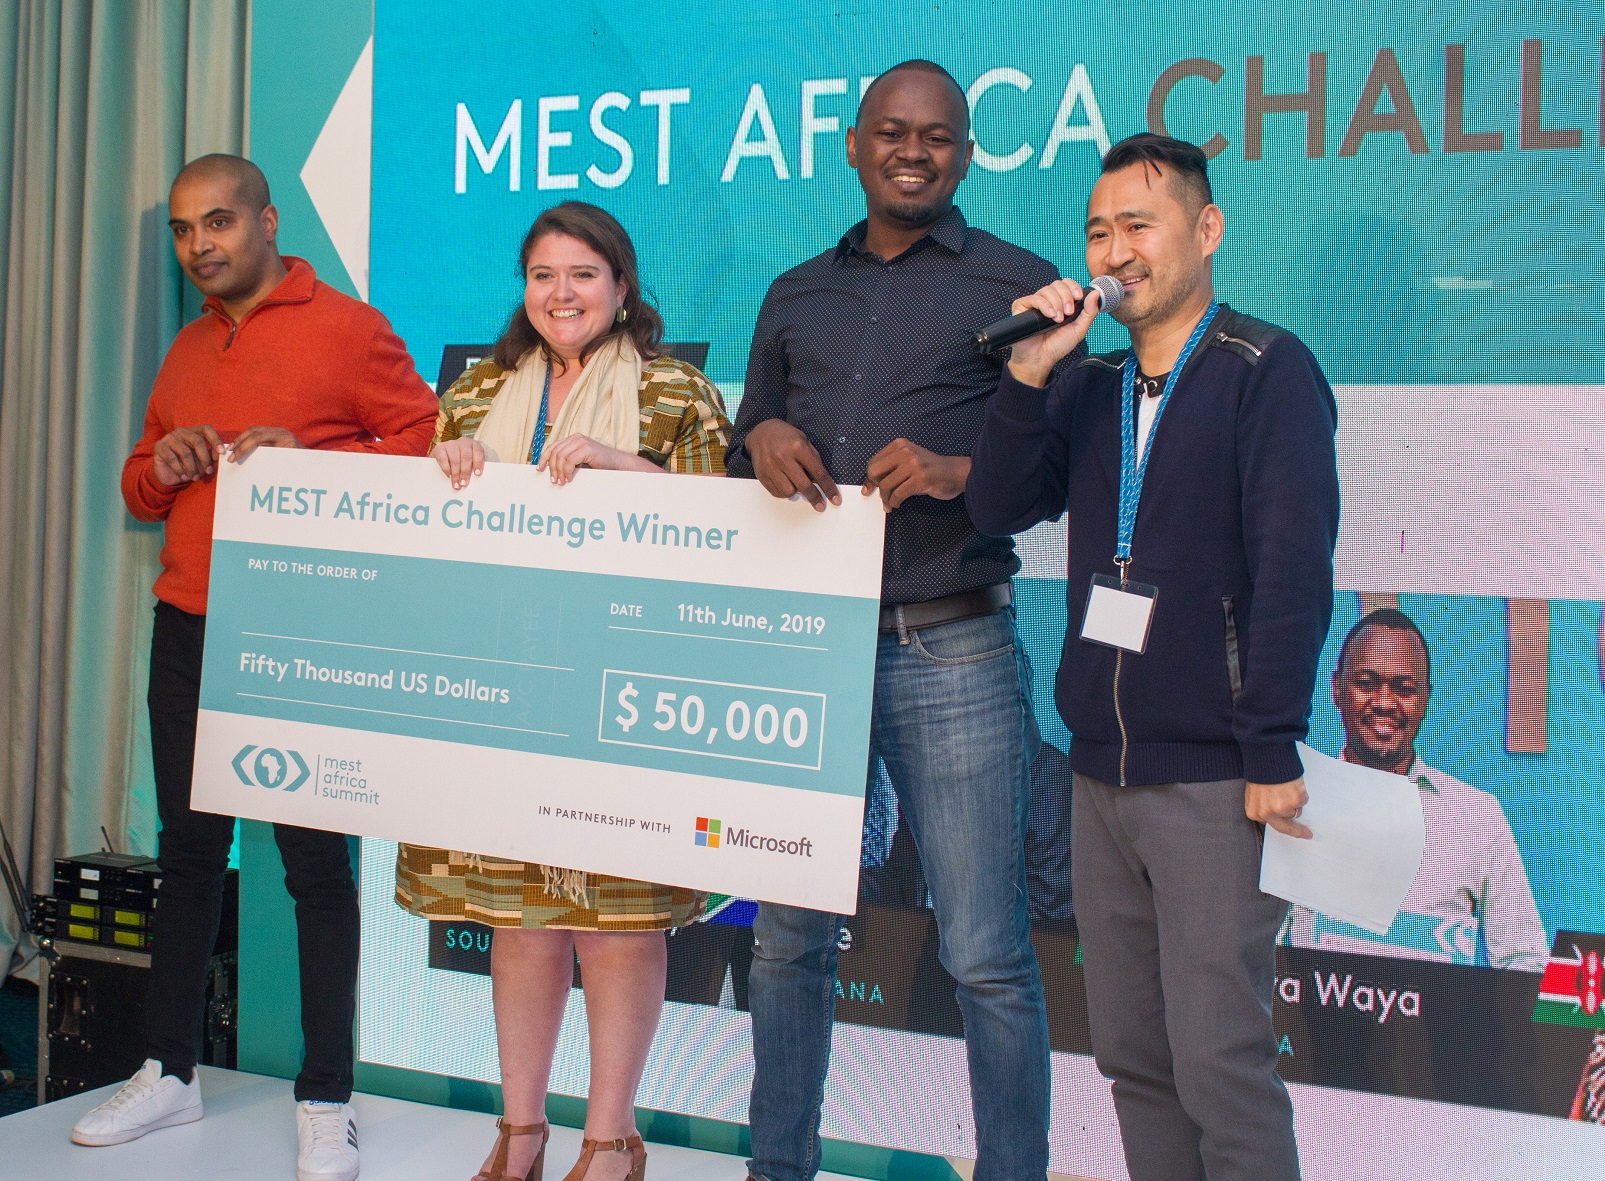 One of the winners of the 2019 MEST Africa Challenge receiving her dummy cheque of USD$50,000 during the MEST Africa Summit in Nairobi, Kenya on Thursday 13th, June 2019.